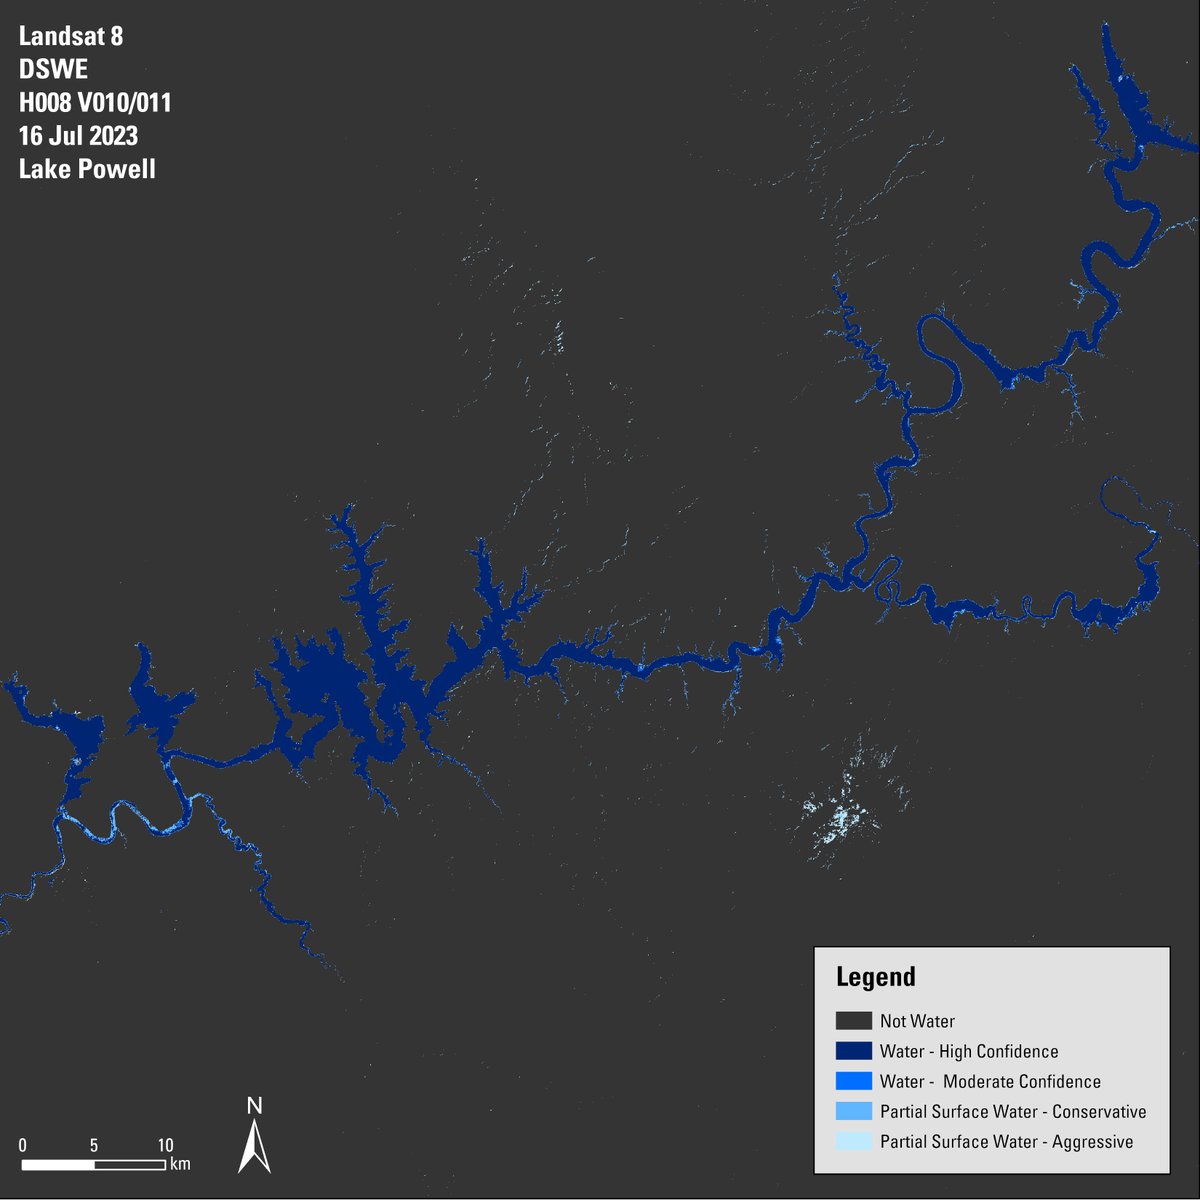 March 10-16 is National Groundwater Awareness week. In honor of this week here are two Landsat Level-3 Dynamic Surface Water Extent (DSWE) images of Lake Powell from 2013 to 2023. Learn more about Landsat DSWE science products by visiting ow.ly/6uIA50QRvNH